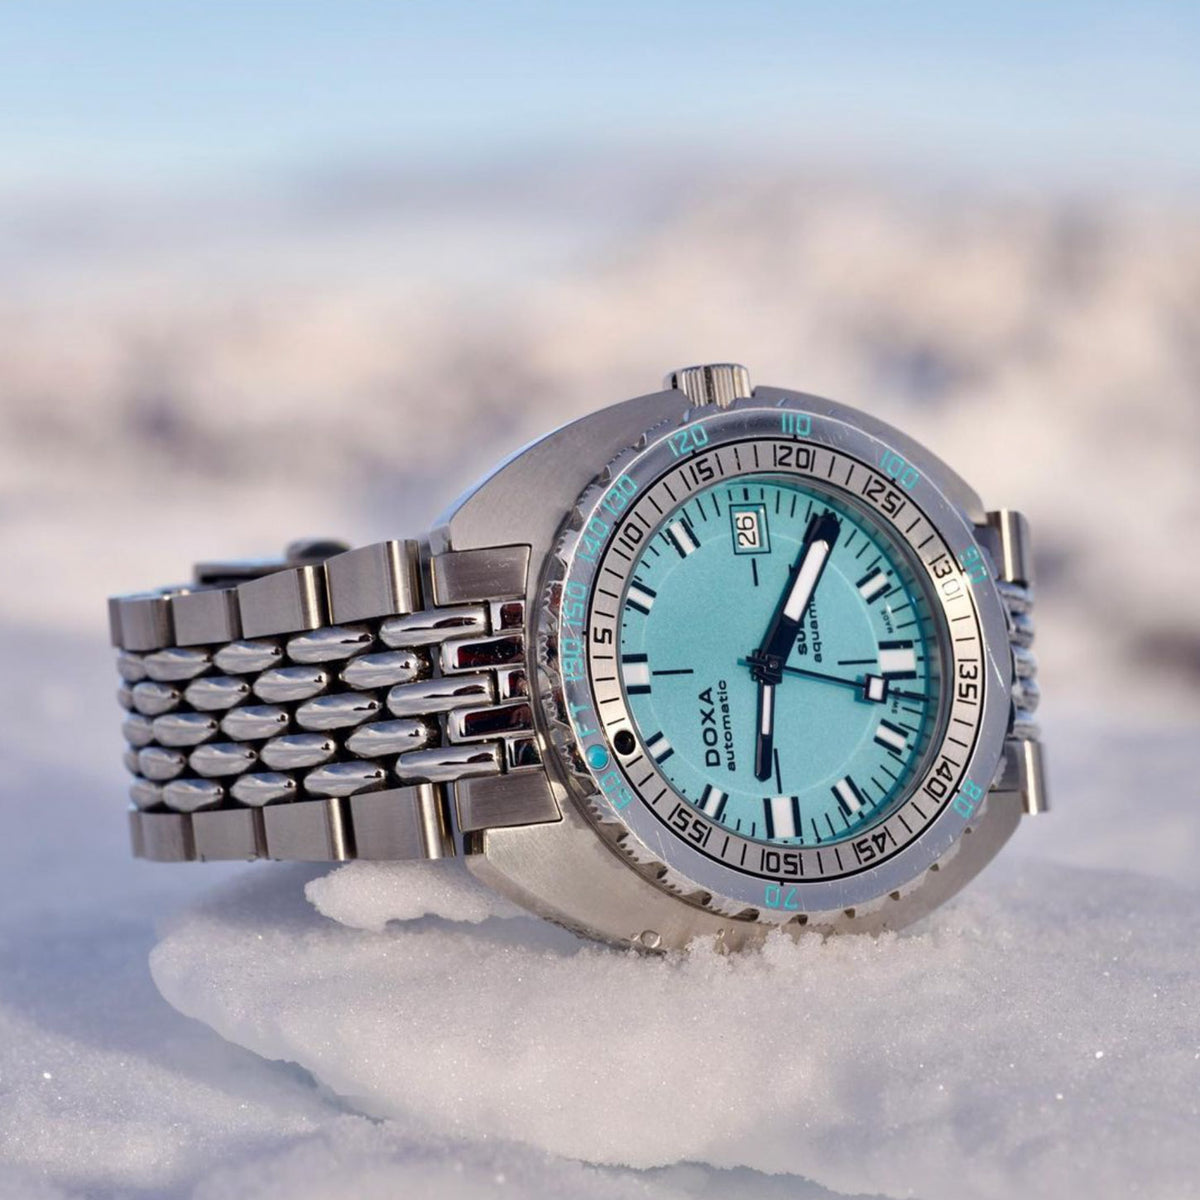 Are Watches Damaged by Cold Weather?